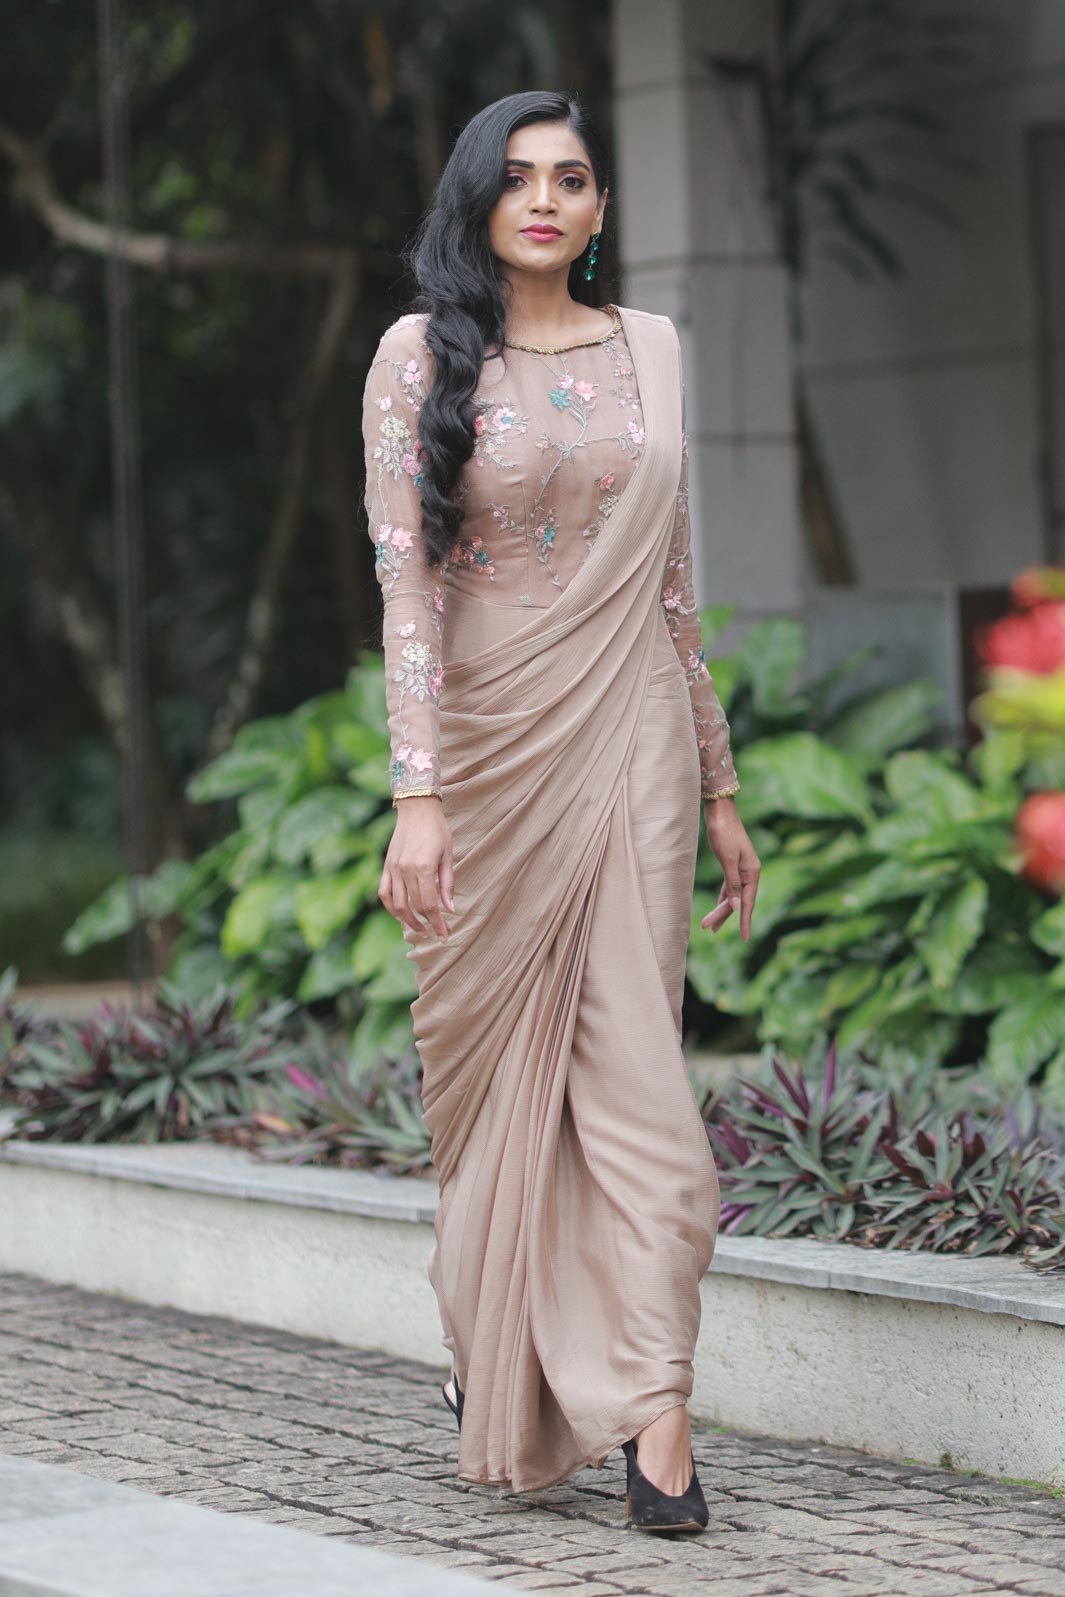 Evelyn - Draped Saree Gown